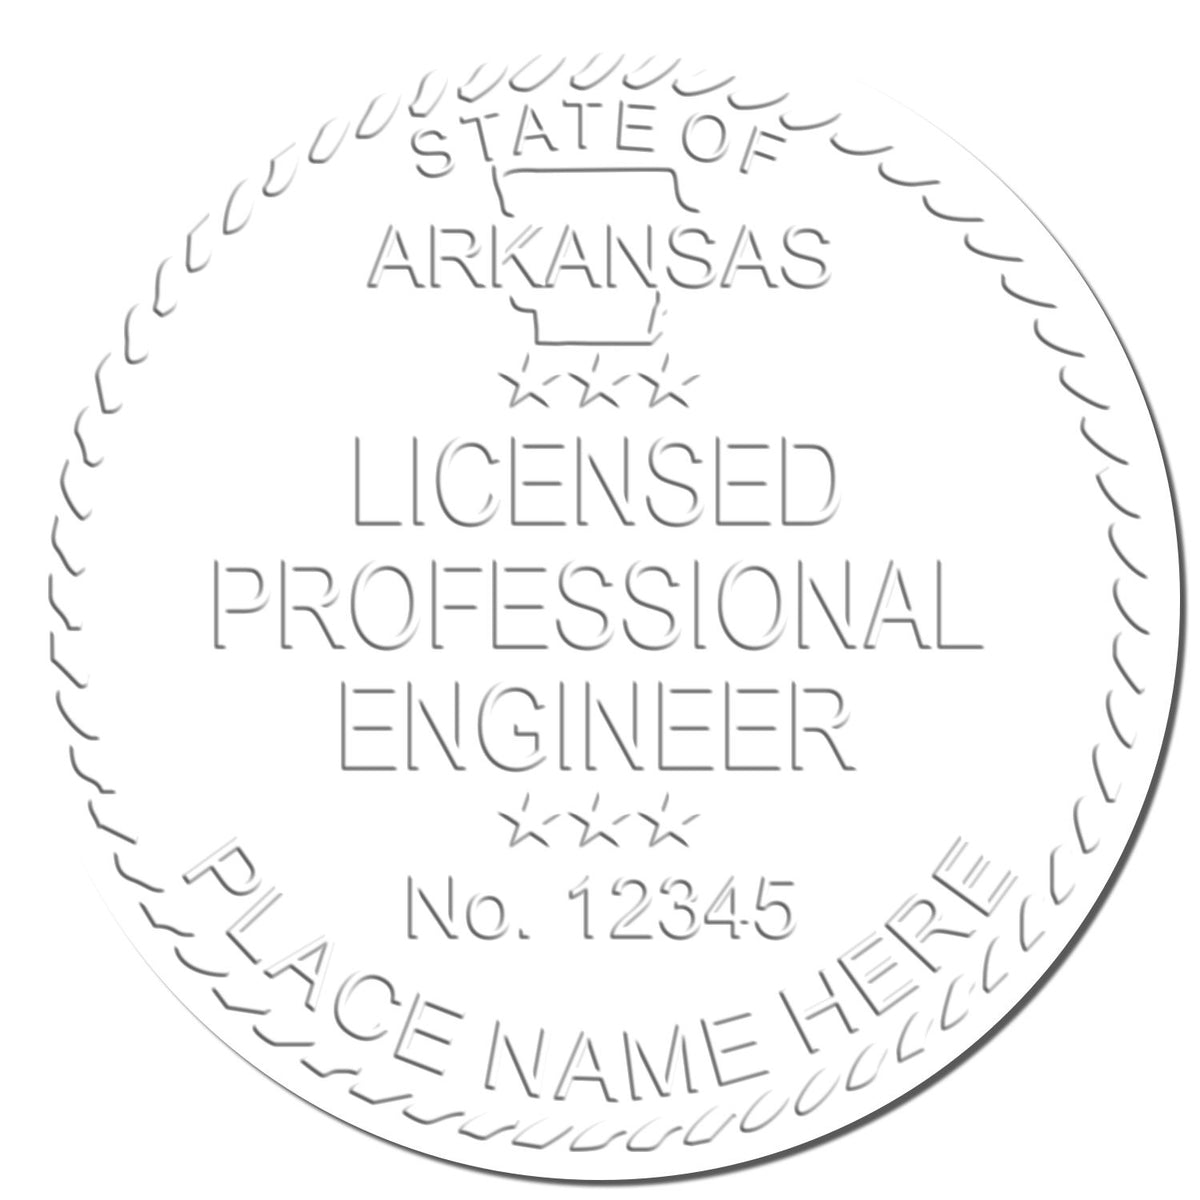 This paper is stamped with a sample imprint of the State of Arkansas Extended Long Reach Engineer Seal, signifying its quality and reliability.